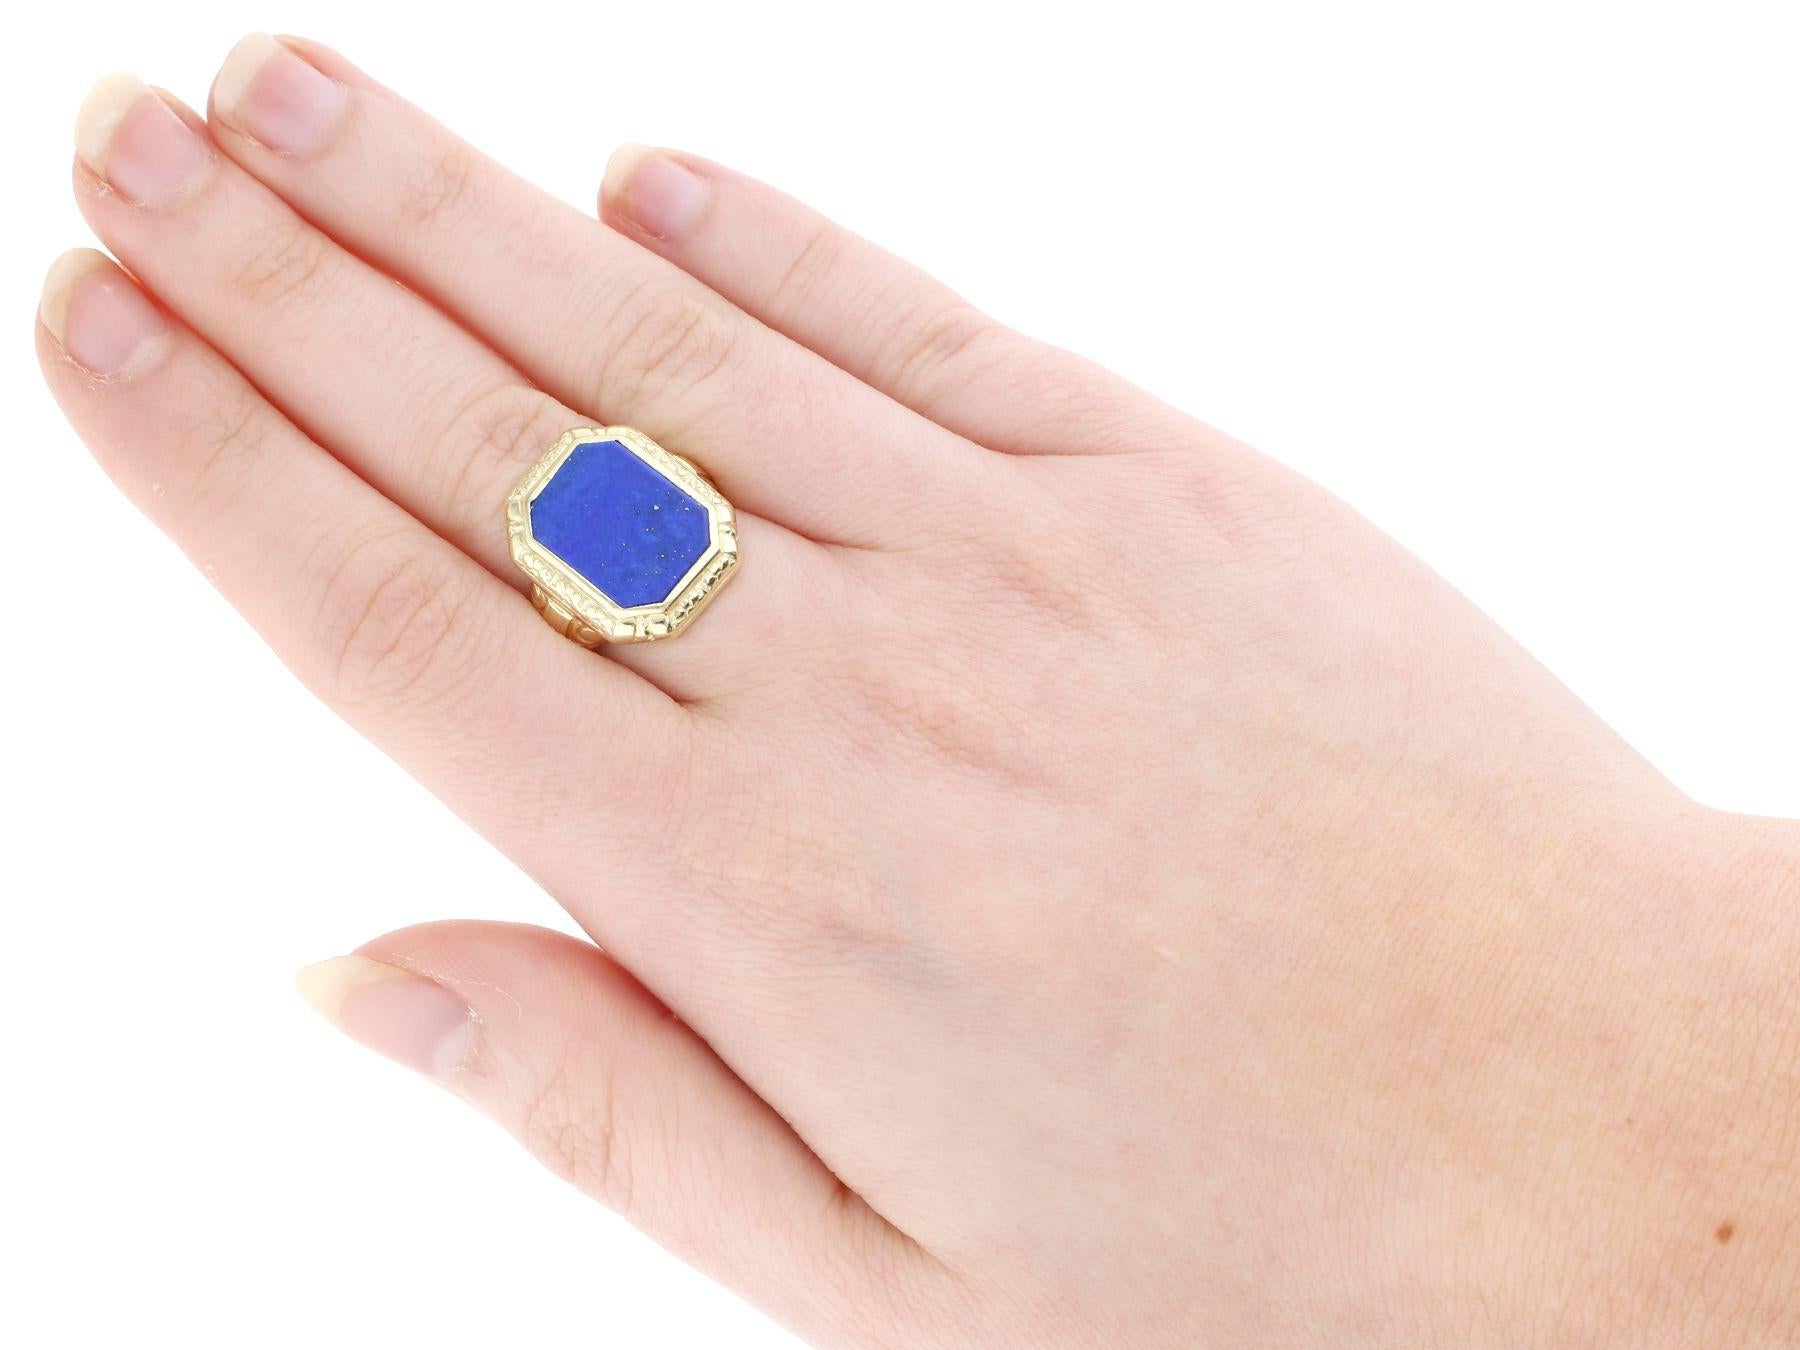 Antique 2.21Ct Lapis Lazuli and 14k Yellow Gold Signet Ring In Excellent Condition For Sale In Jesmond, Newcastle Upon Tyne